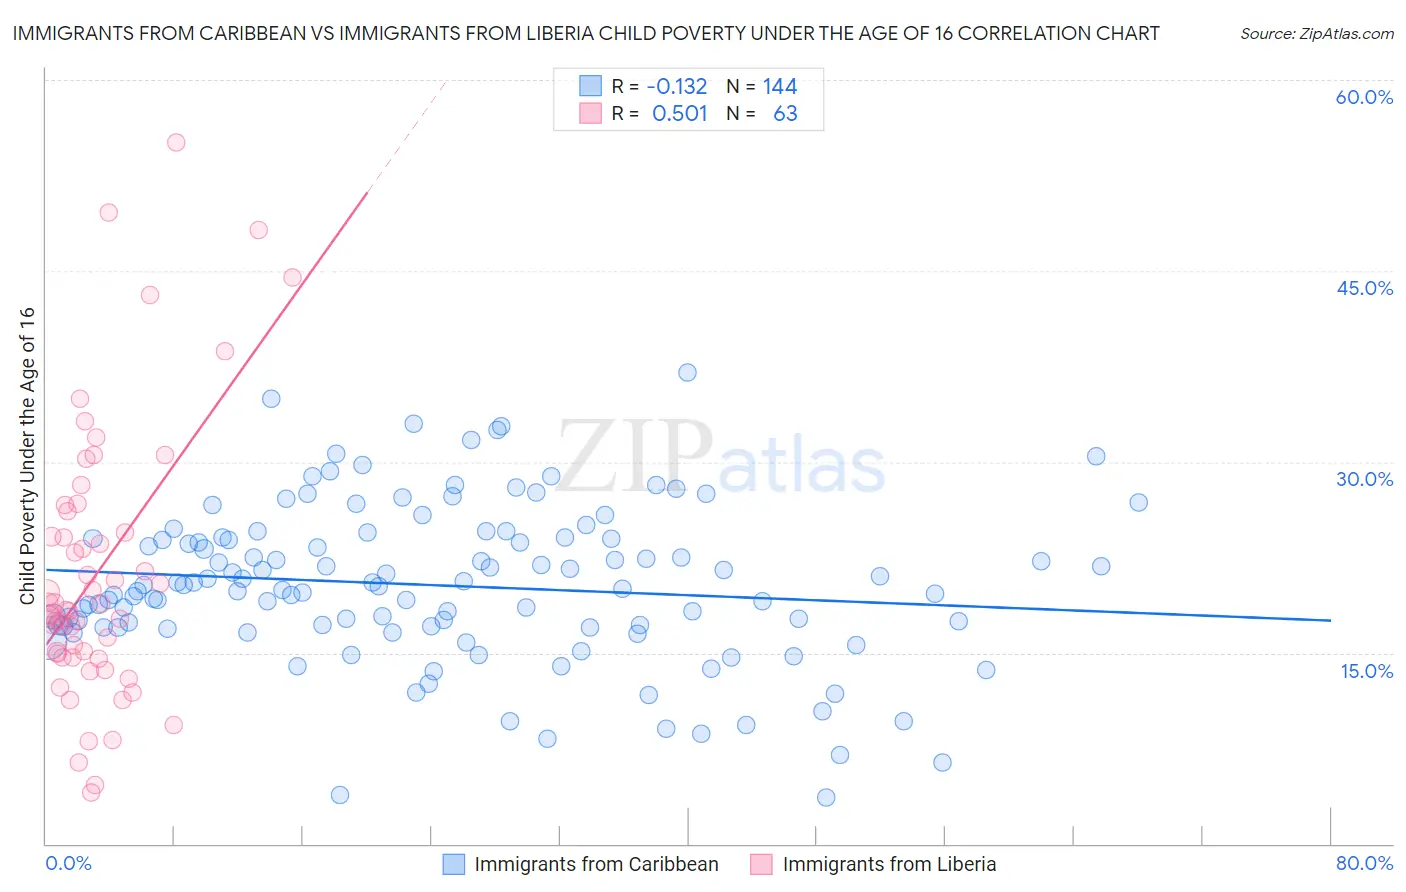 Immigrants from Caribbean vs Immigrants from Liberia Child Poverty Under the Age of 16